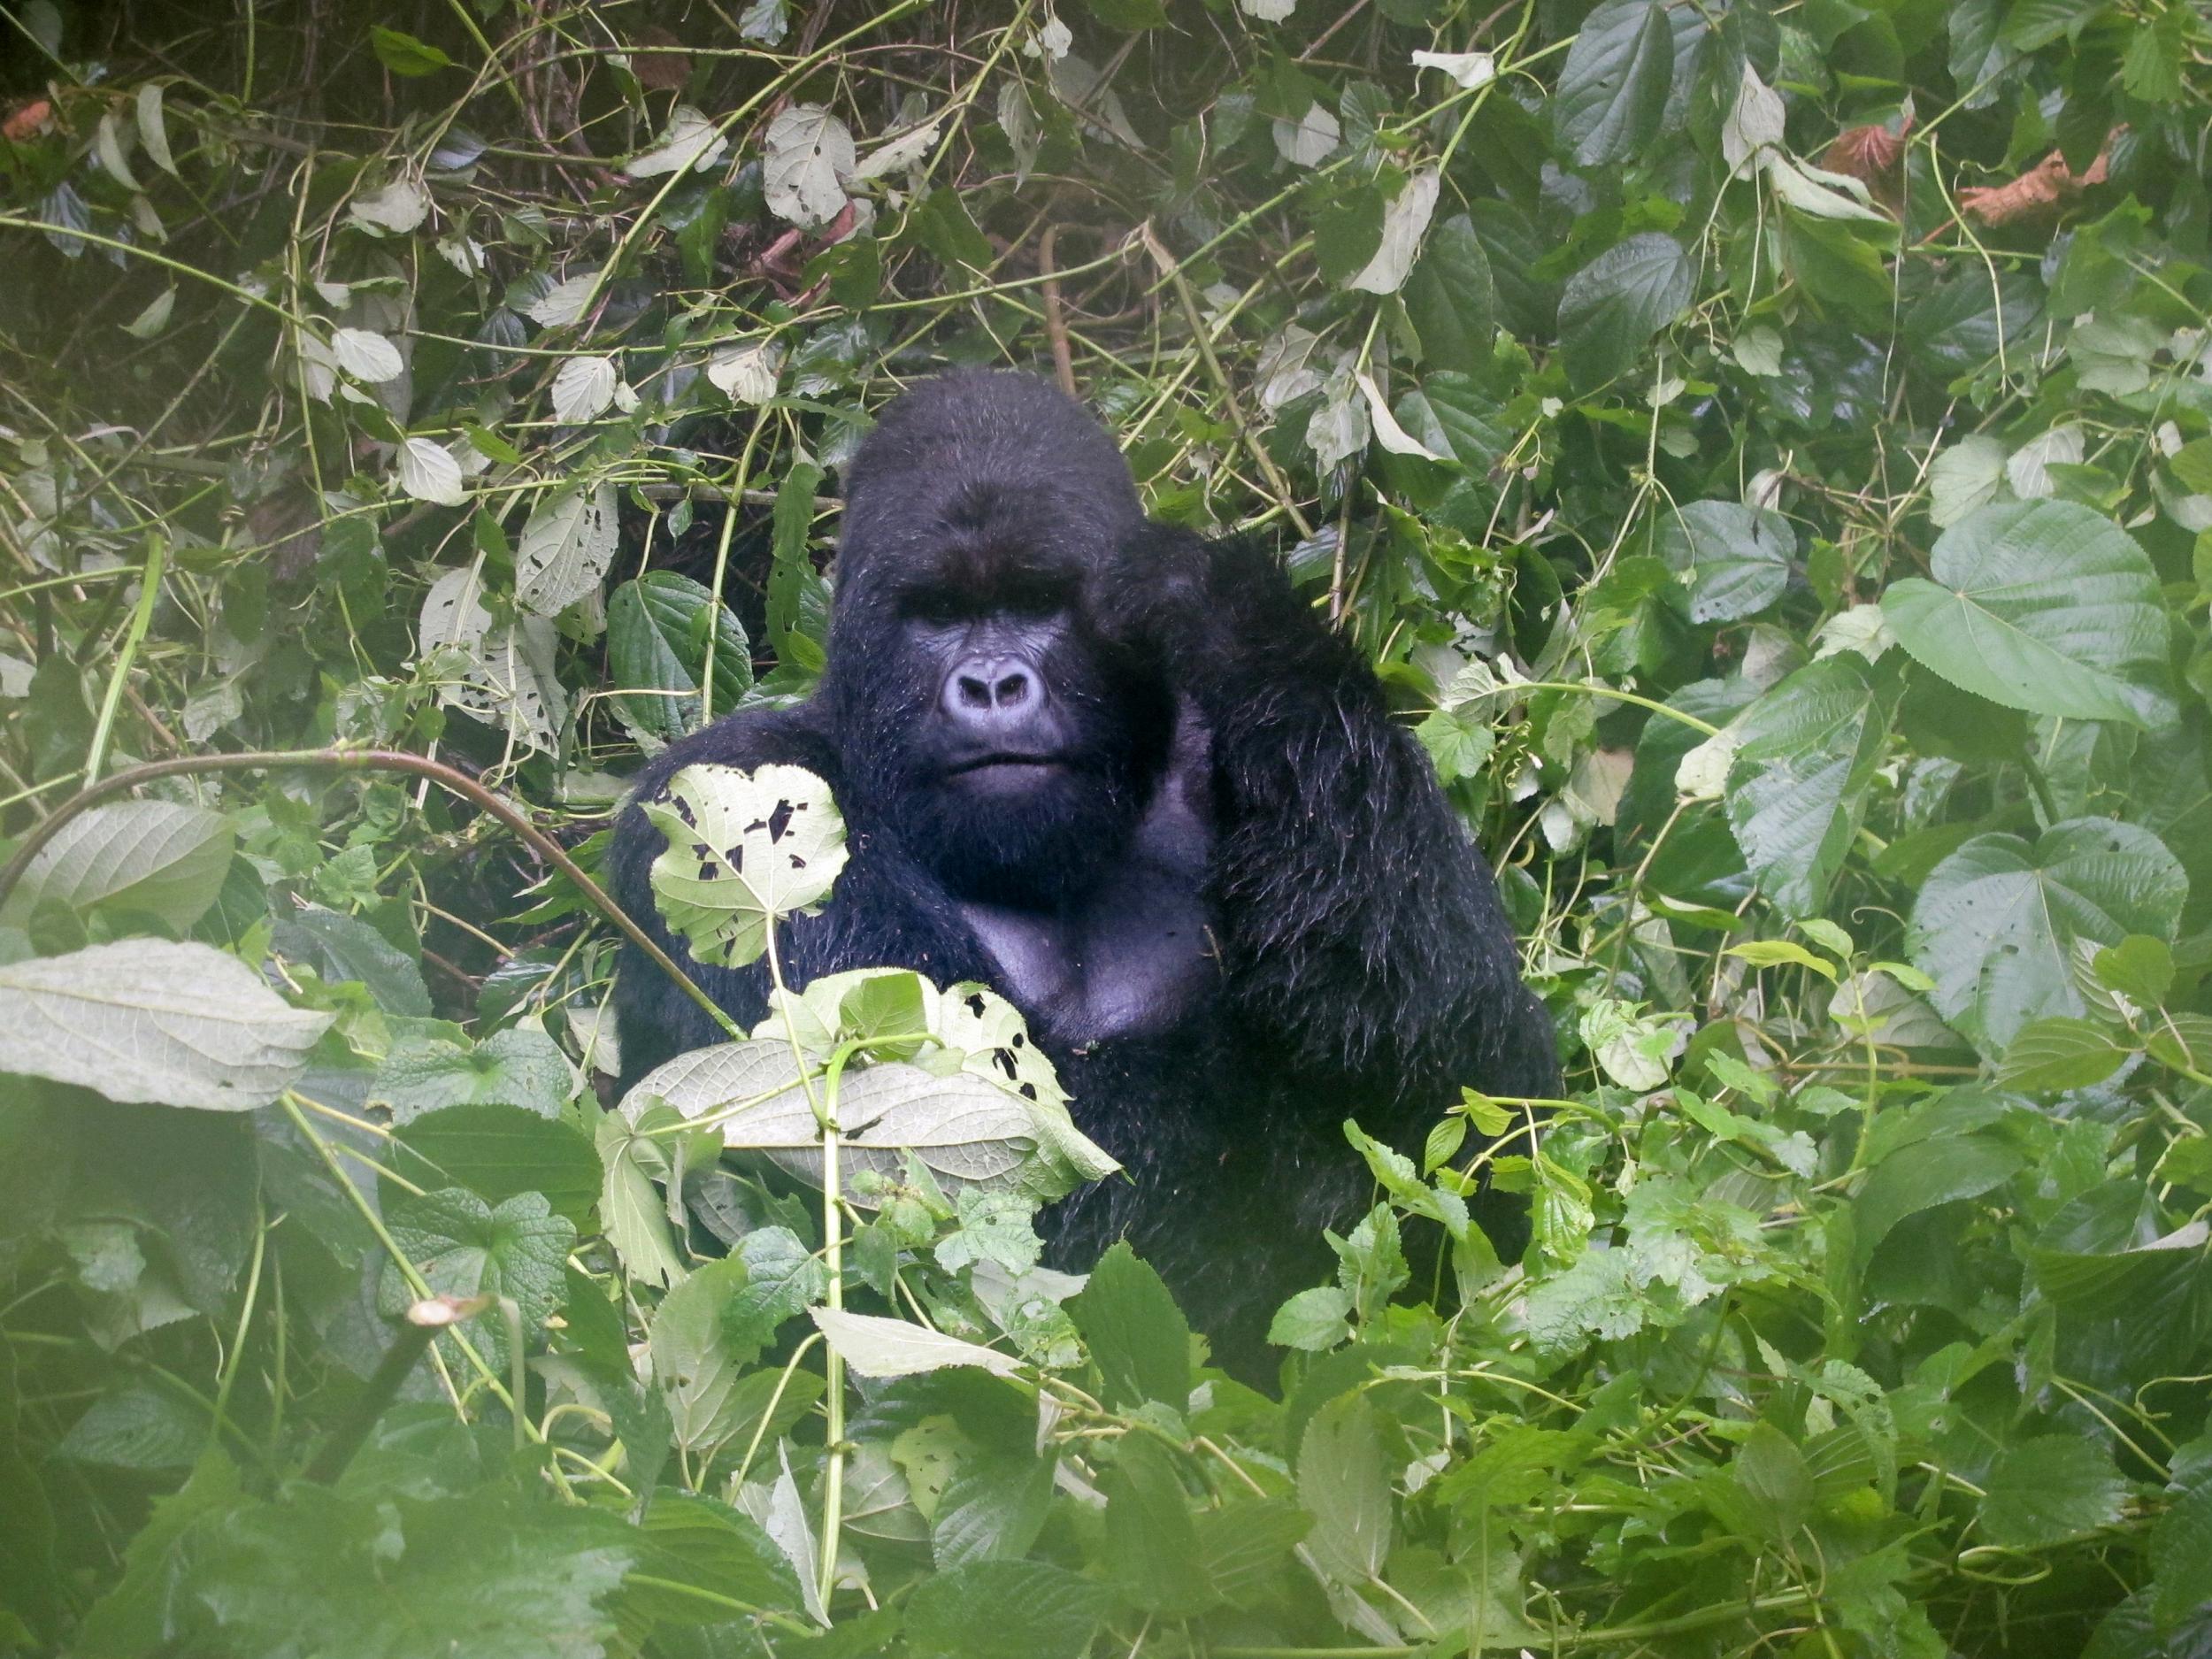 A mountain gorilla in the Virguna National Park, in the Democratic Republic of Congo. The park is home to about a quarter of the world's critically endangered mountain gorillas